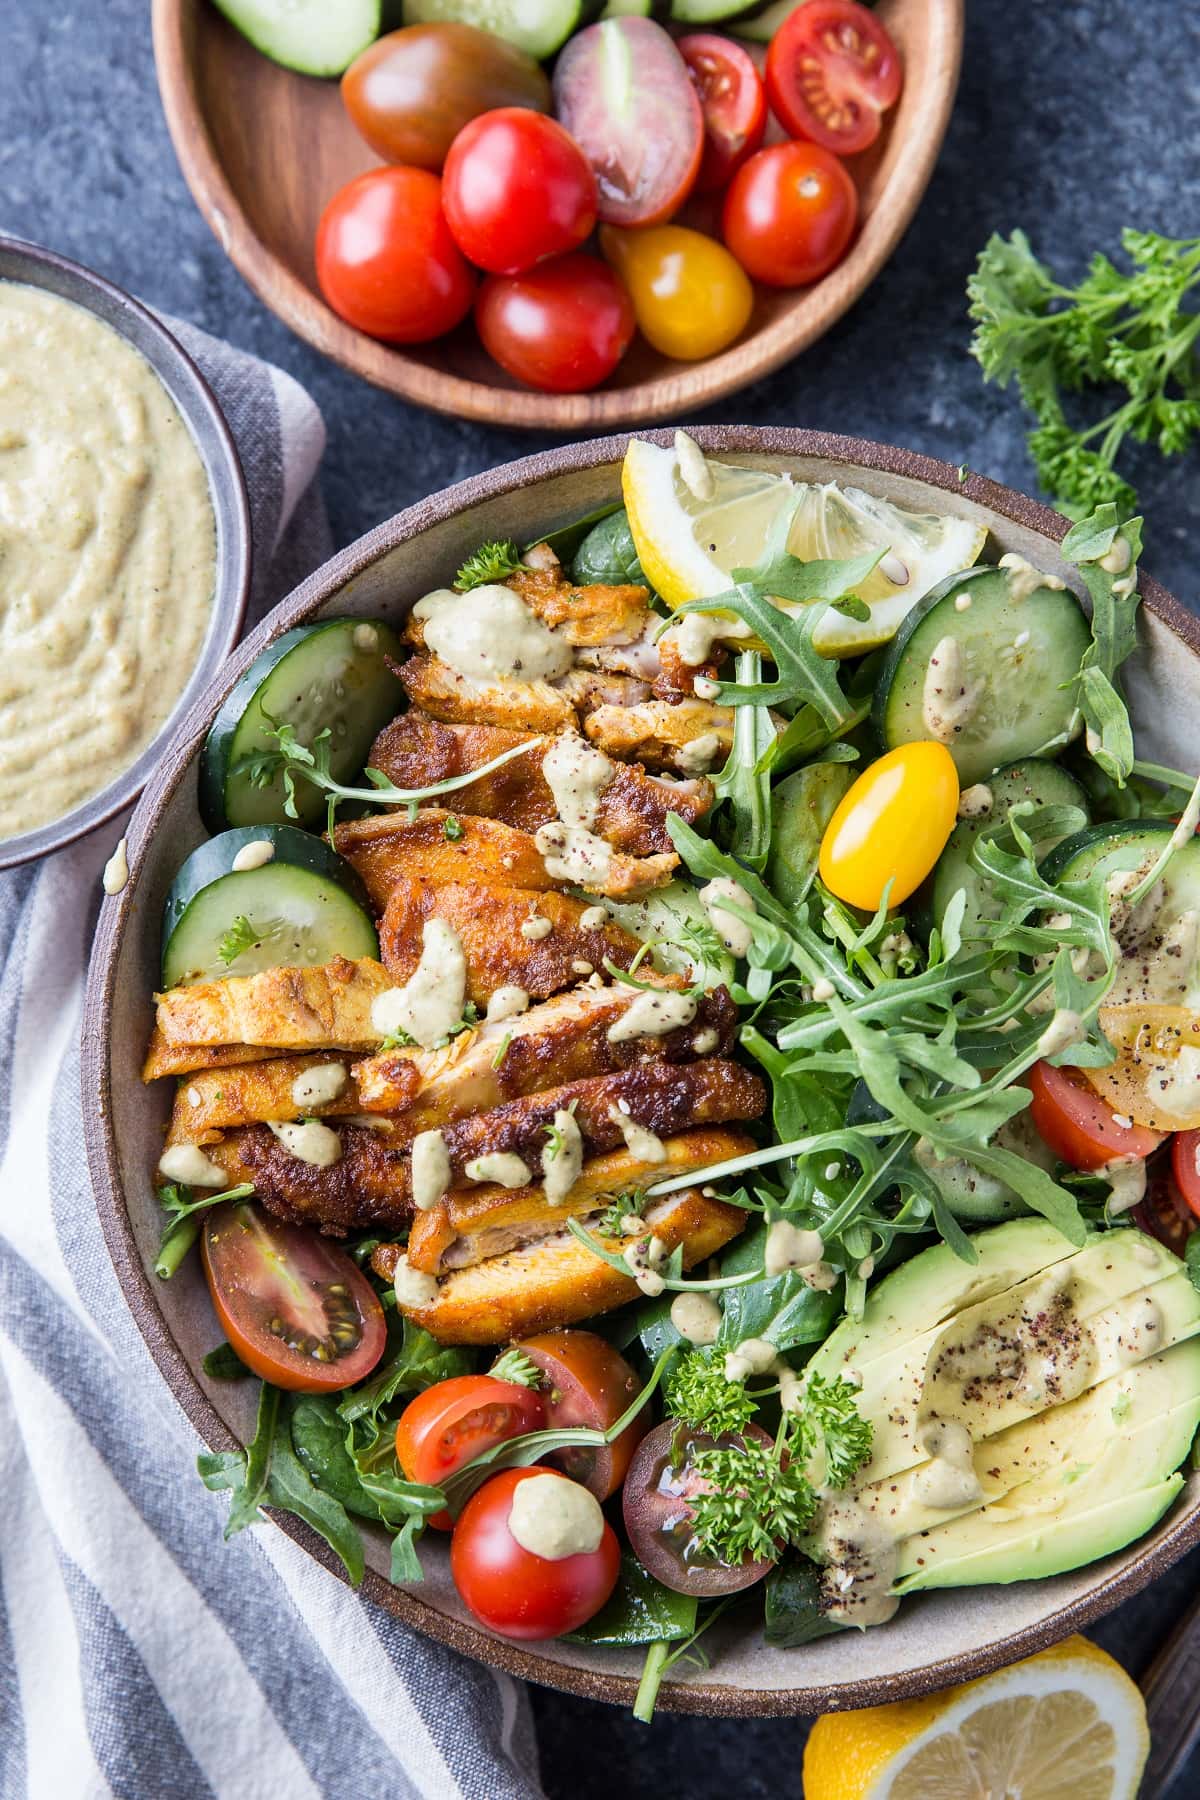 Crispy Mediterranean Chicken Salad with Lemon Herb Tahini Dressing - a delicious vibrant salad perfect for clean eating - paleo, whole30, keto, low-carb | TheRoastedRoot.net